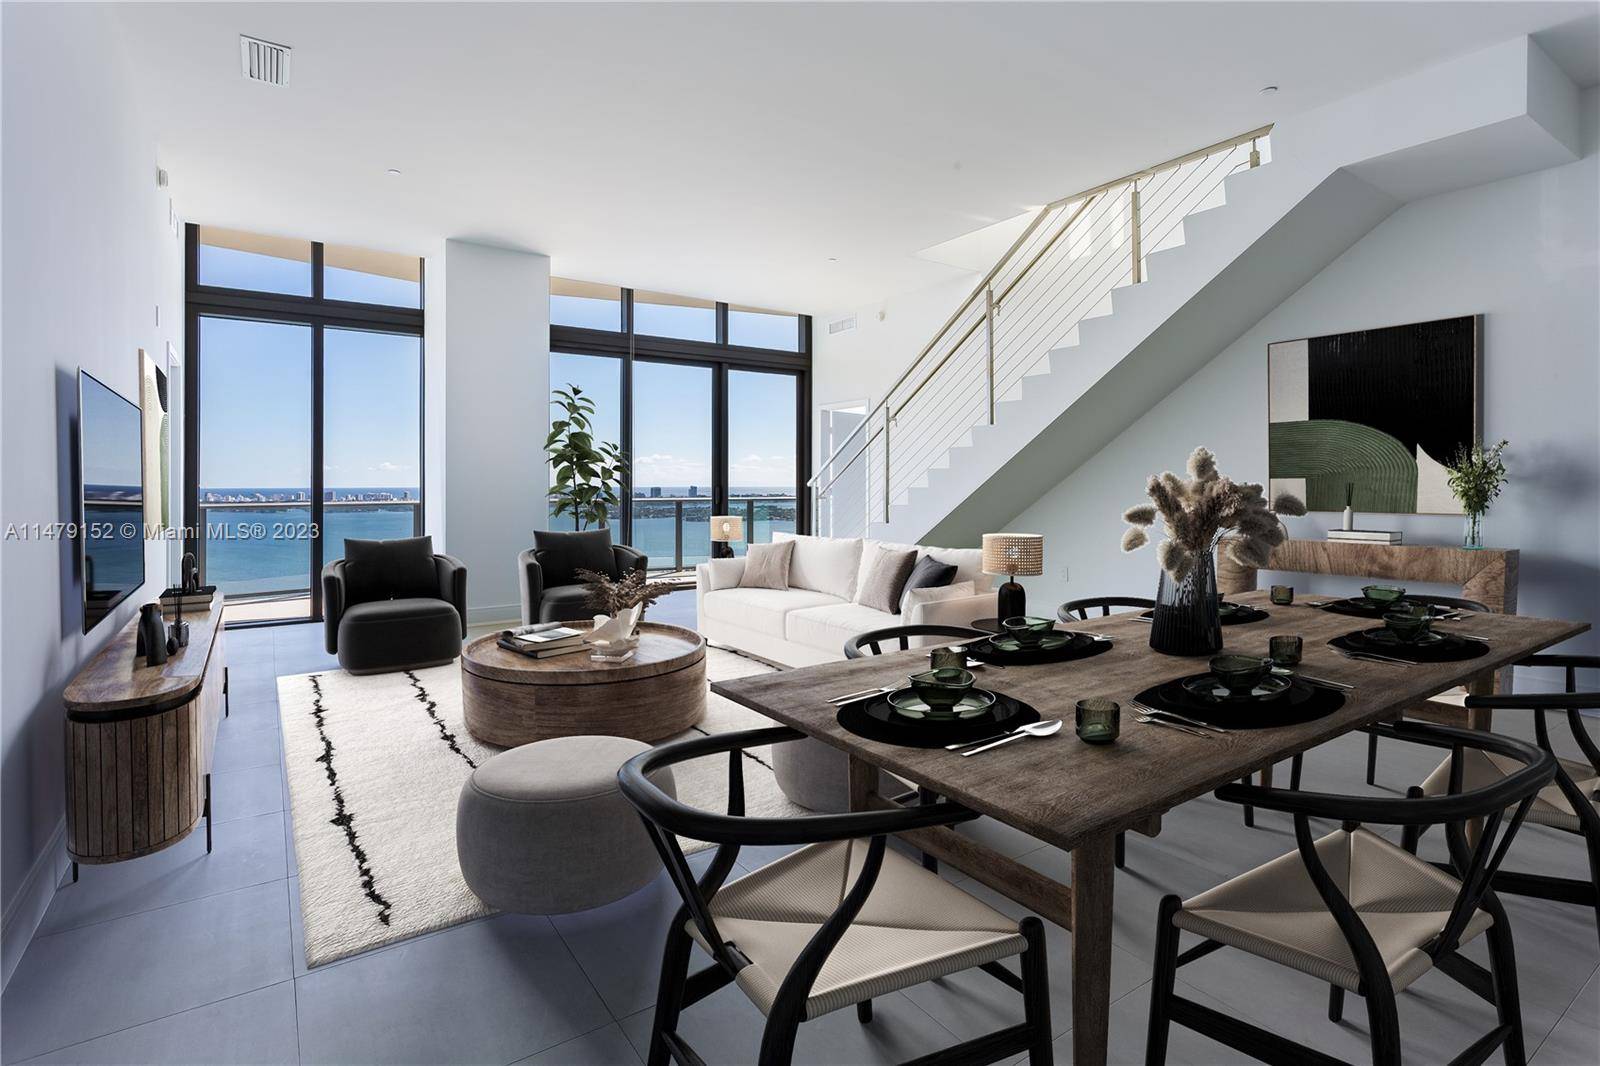 Prepare to be amazed by the breathtaking Miami views offered by this extraordinary Upper Penthouse.